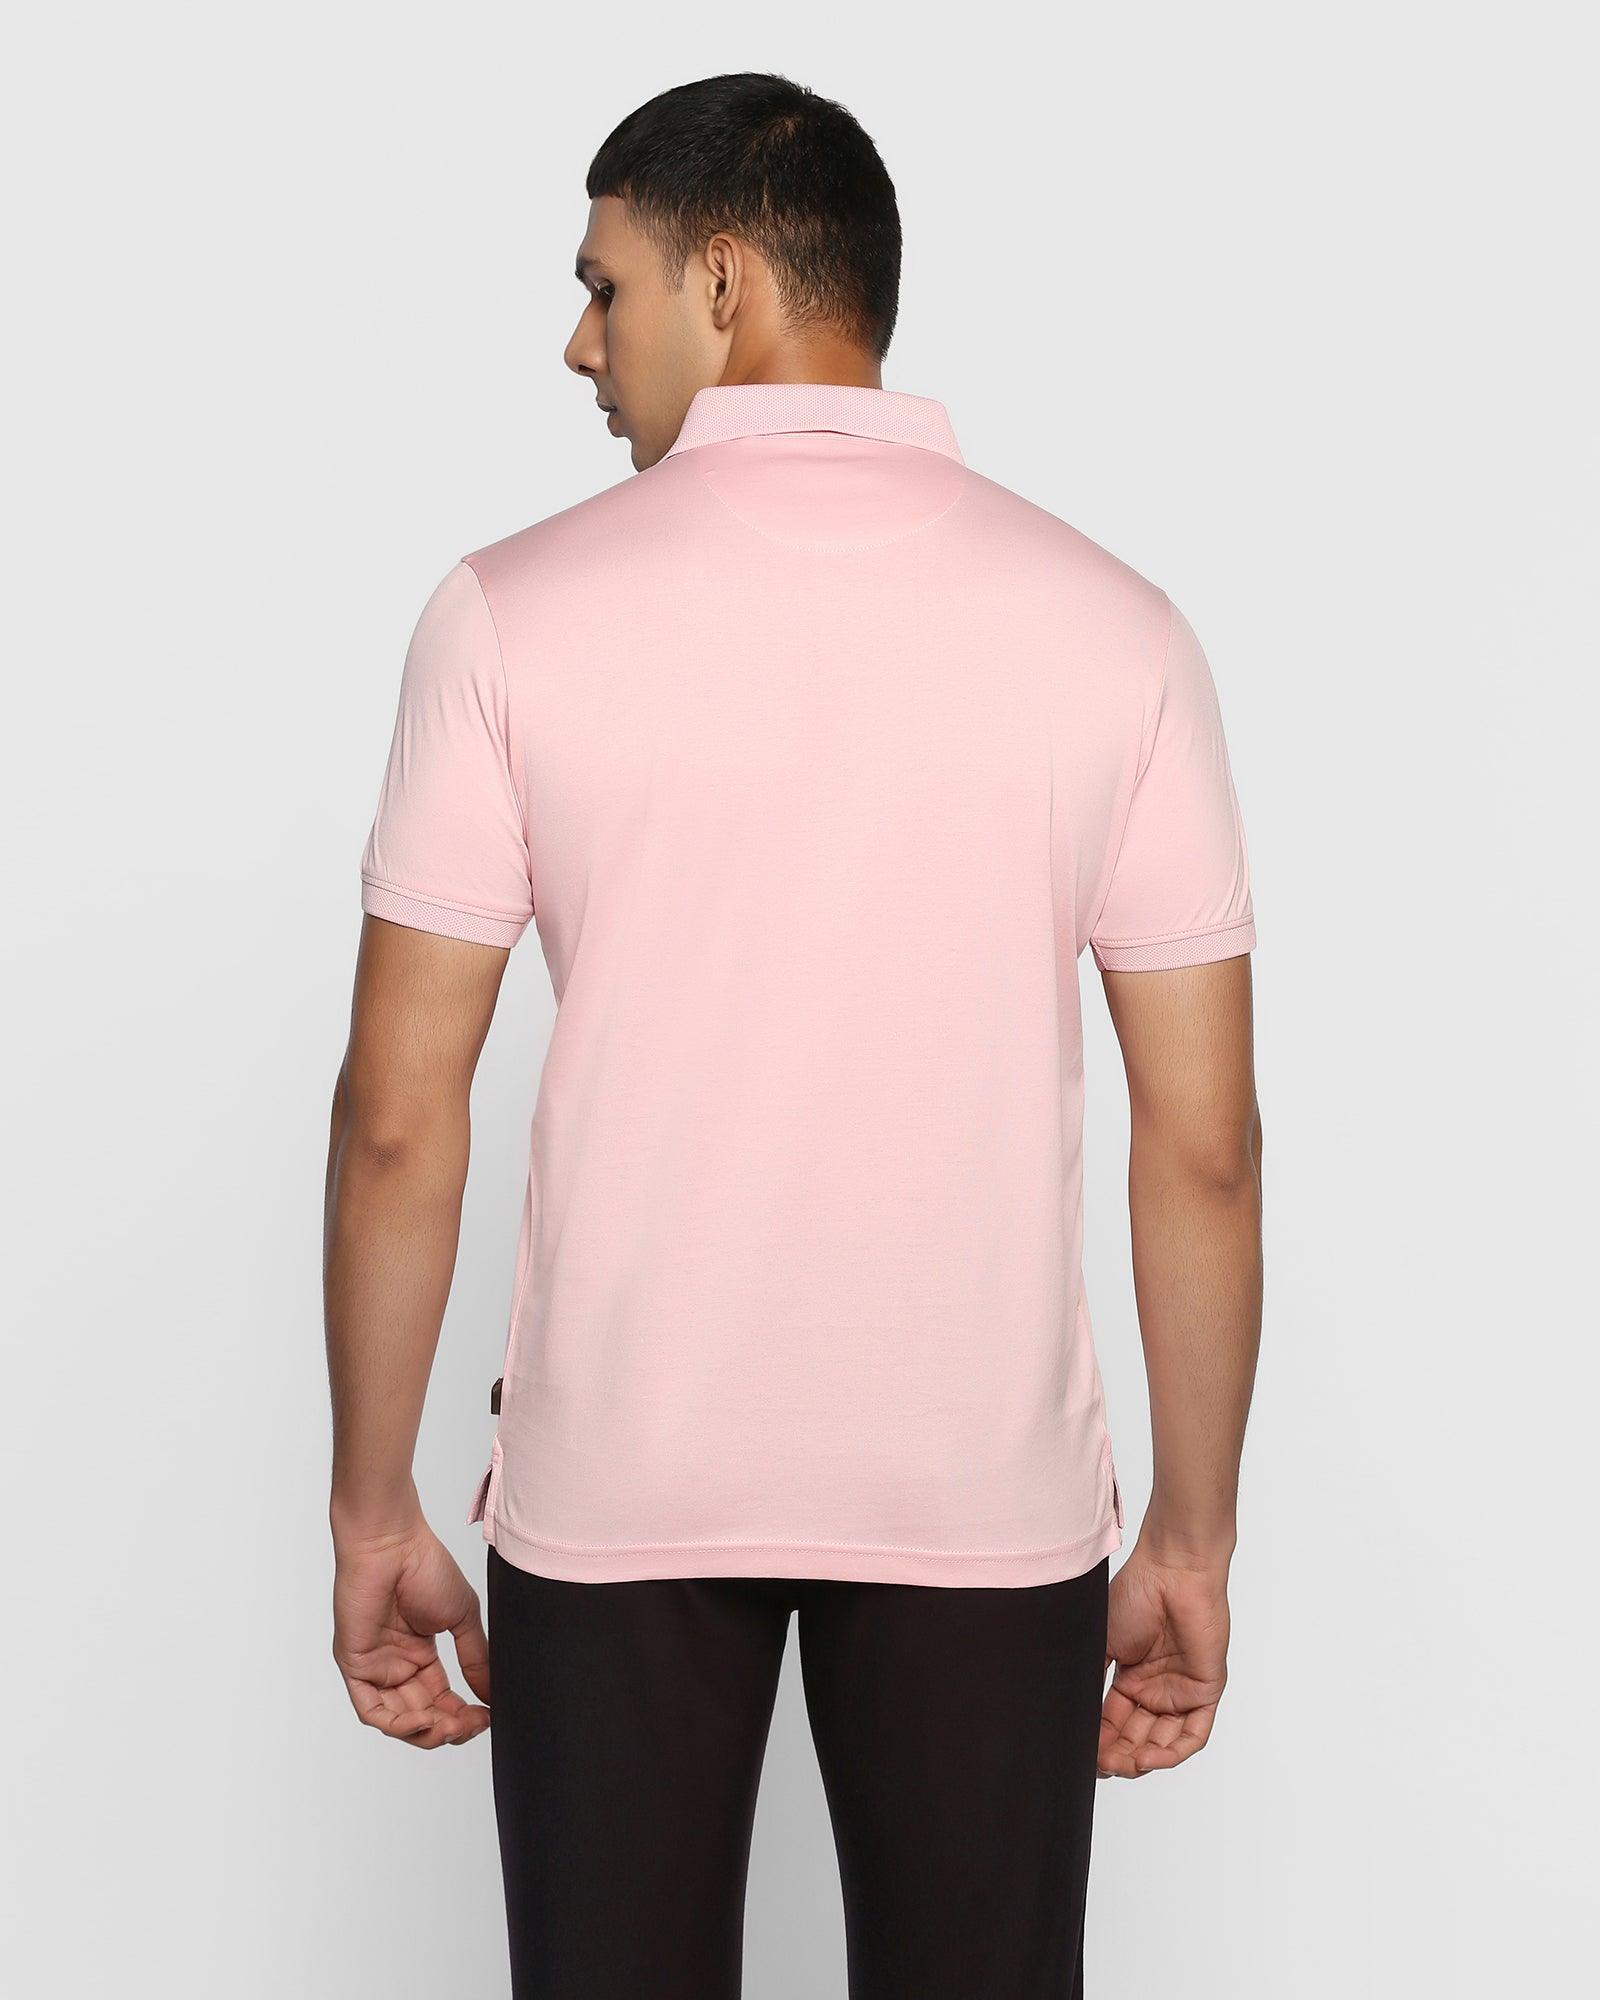 Polo Pink Solid T Shirt - Mercury